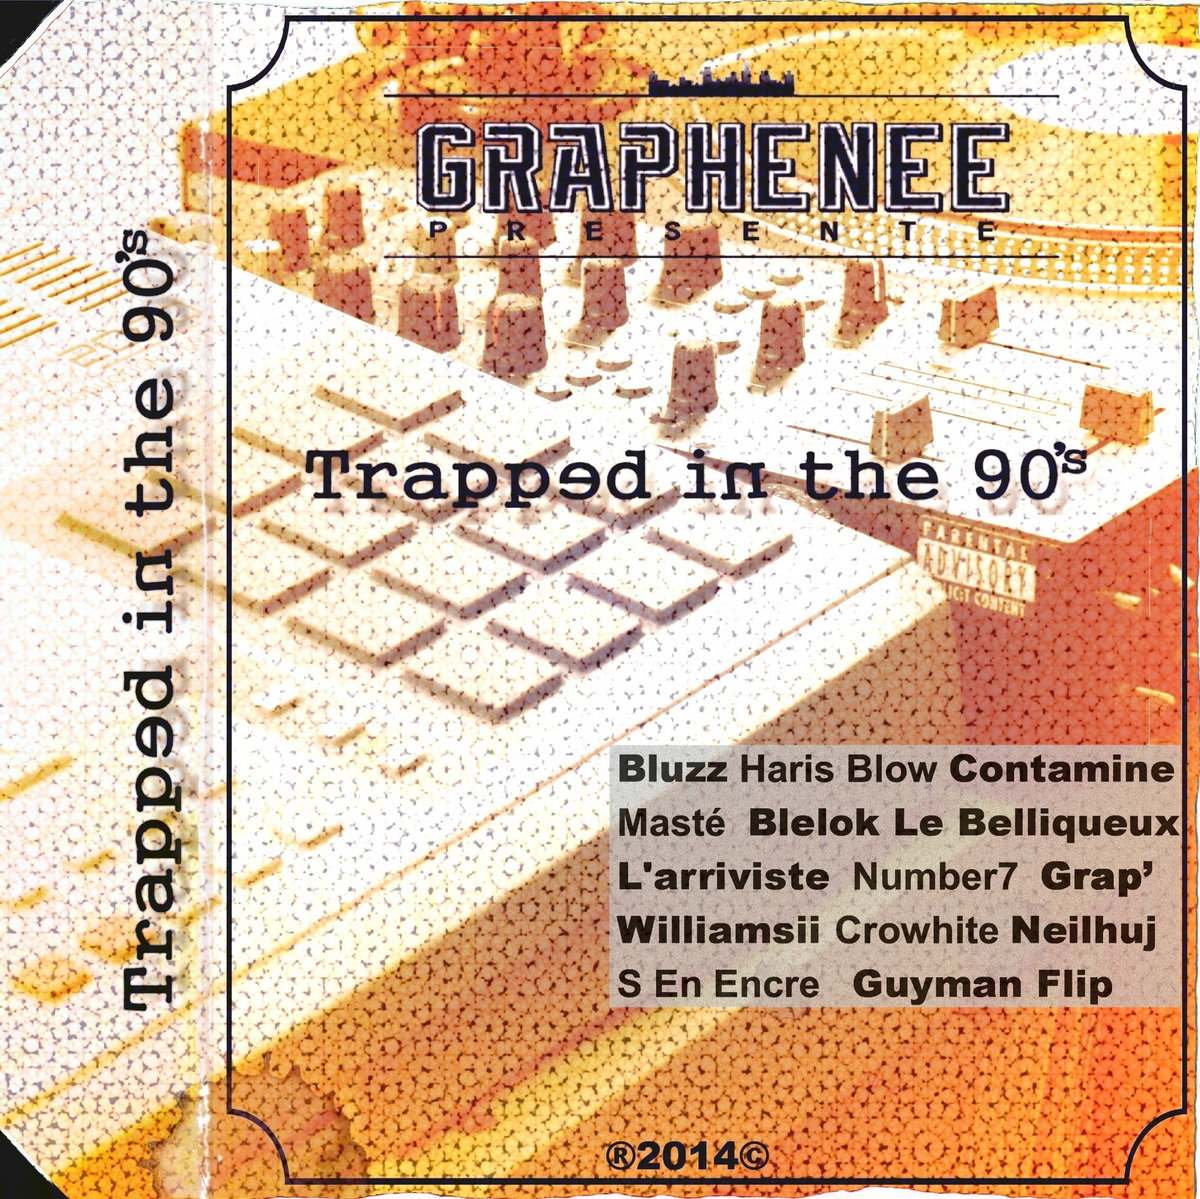 MIXTAPE - 100% RB - Trapped in the 90's - [ prod : GRAPHENEE ] A2725570374_10